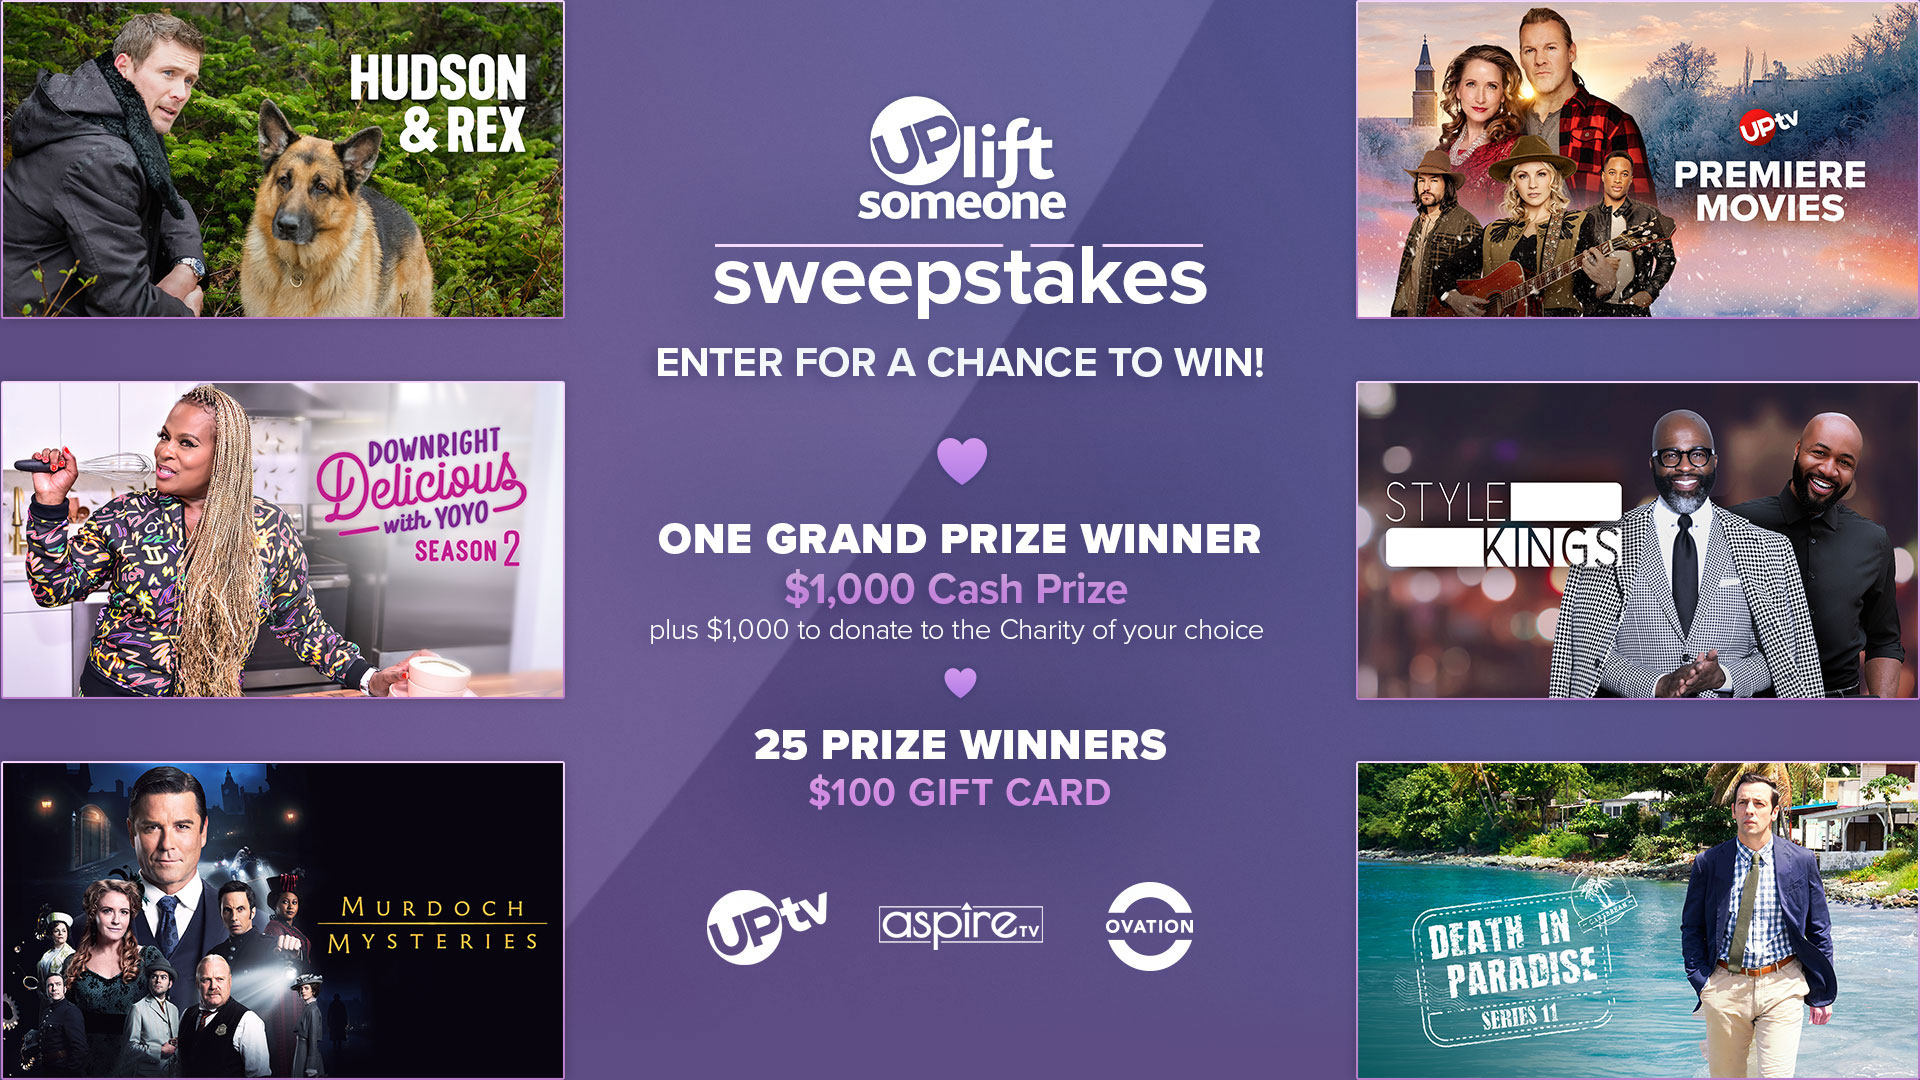 UP Entertainment UPlifting sweepstakes